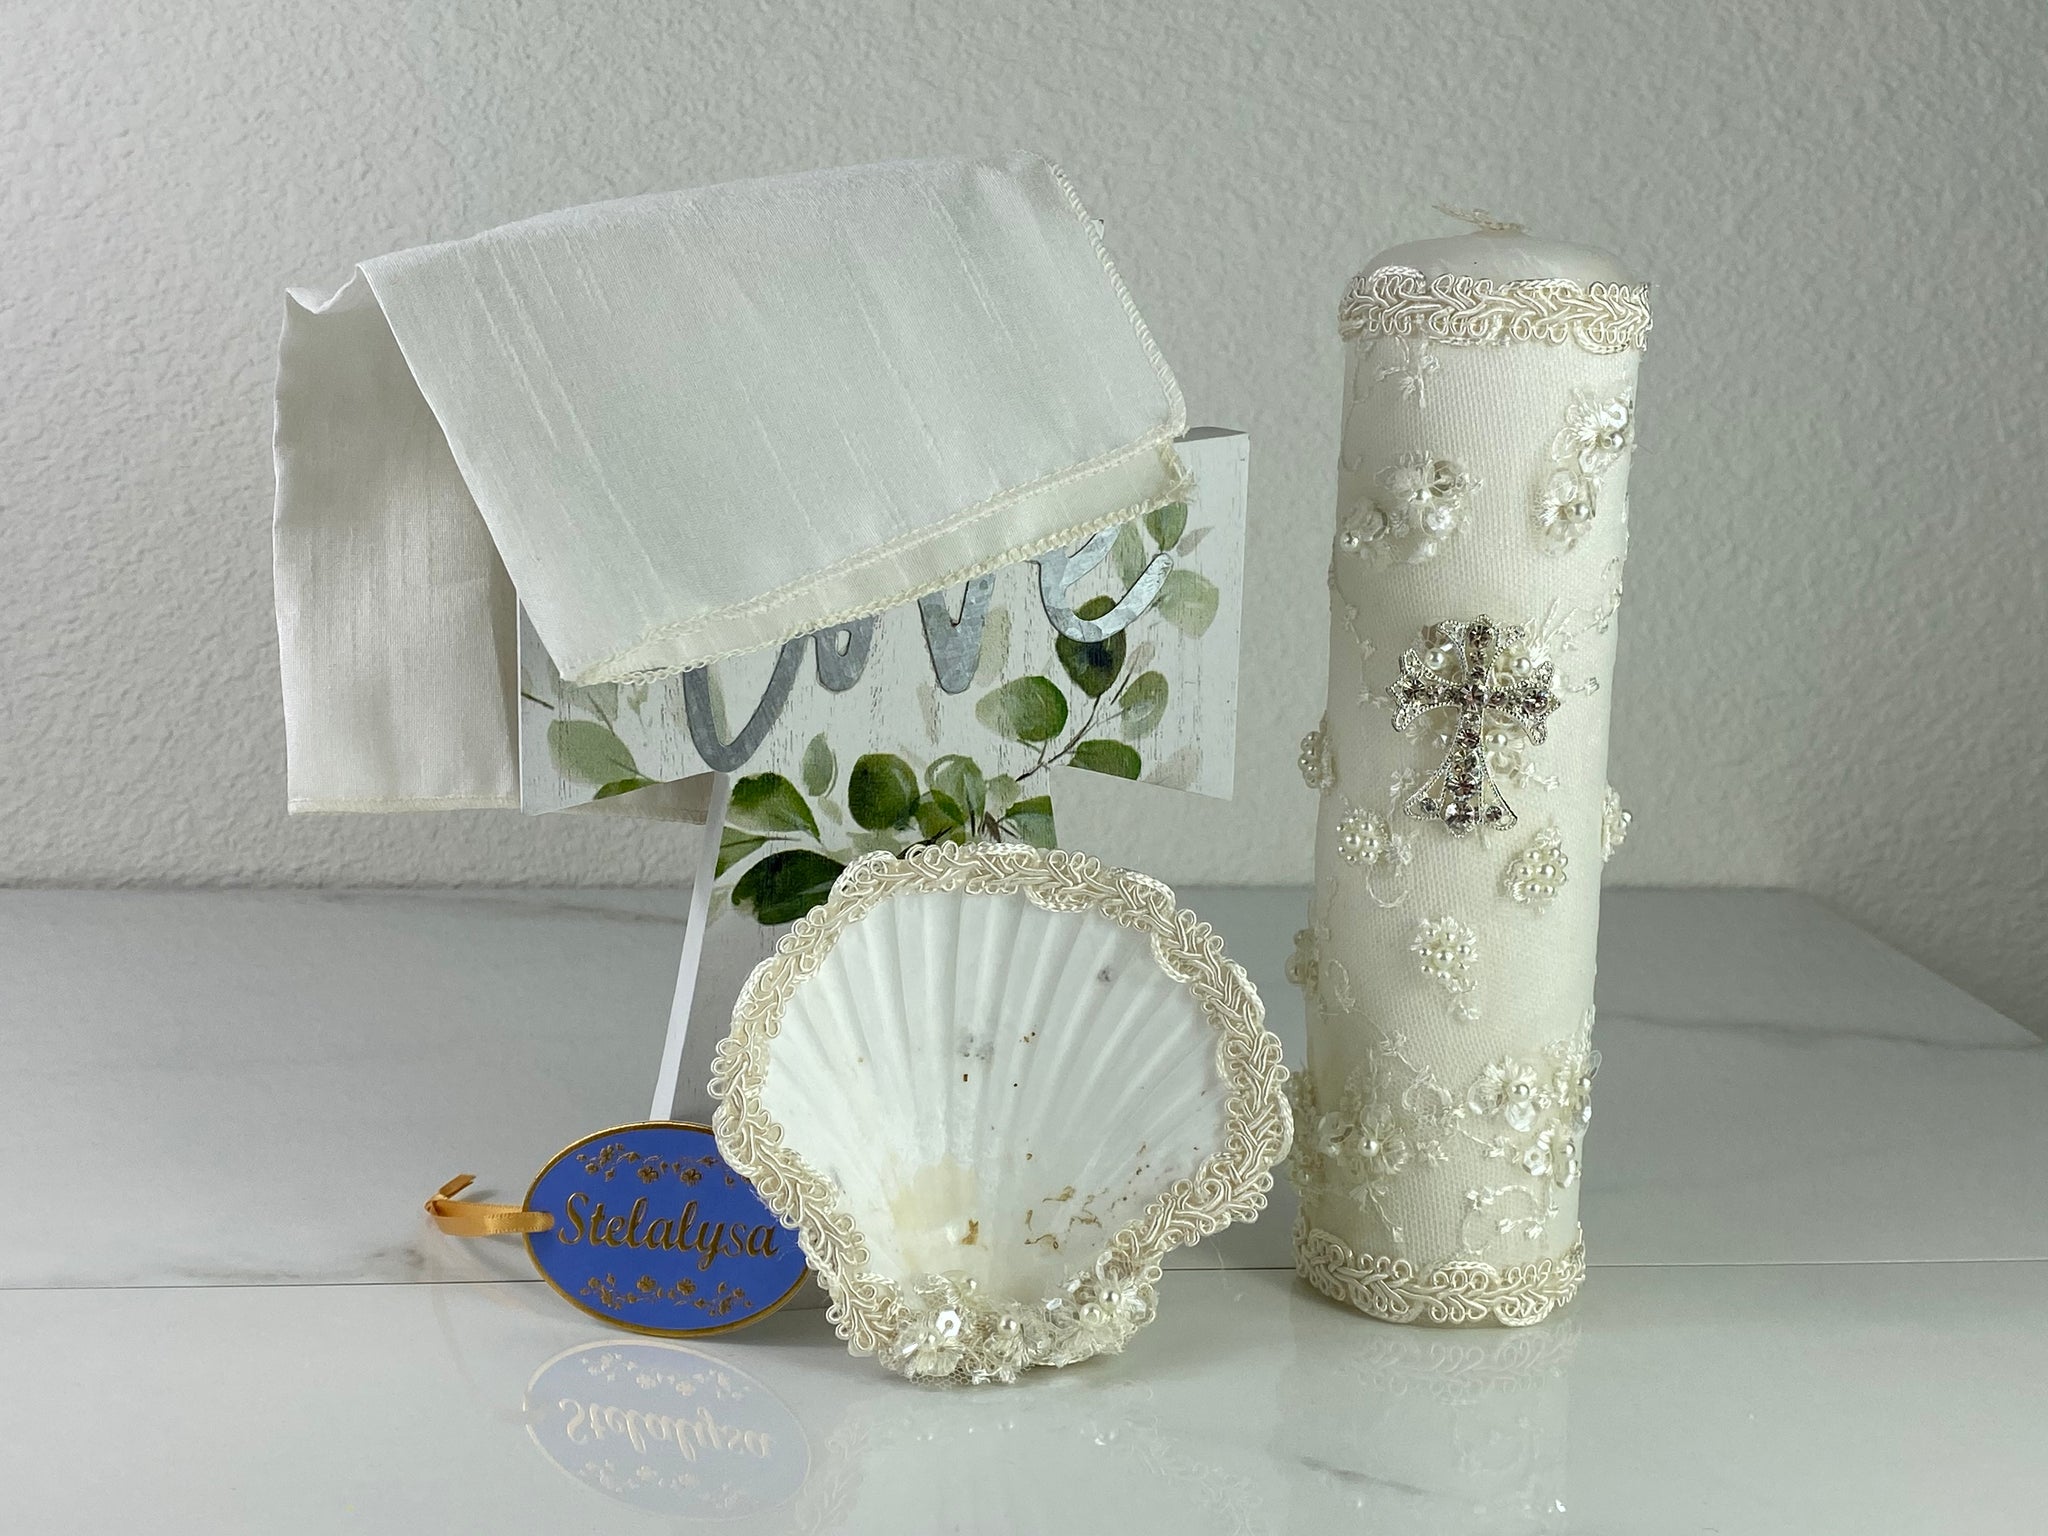 These one-of-a-kind Candle set is handmade and ivory in color.  This candle has a classic look.   It is uniquely decorated with a cross made of crystals, pearl clusters, and lace  making it a gorgeous keepsake.   This candle is cylinder in shape.  To match, the Shell is put together piece by piece to compliment the Candle and Handkerchief.  The Handkerchief is made of satin and embroidered lace to match the Shell and Candle beautifully.  